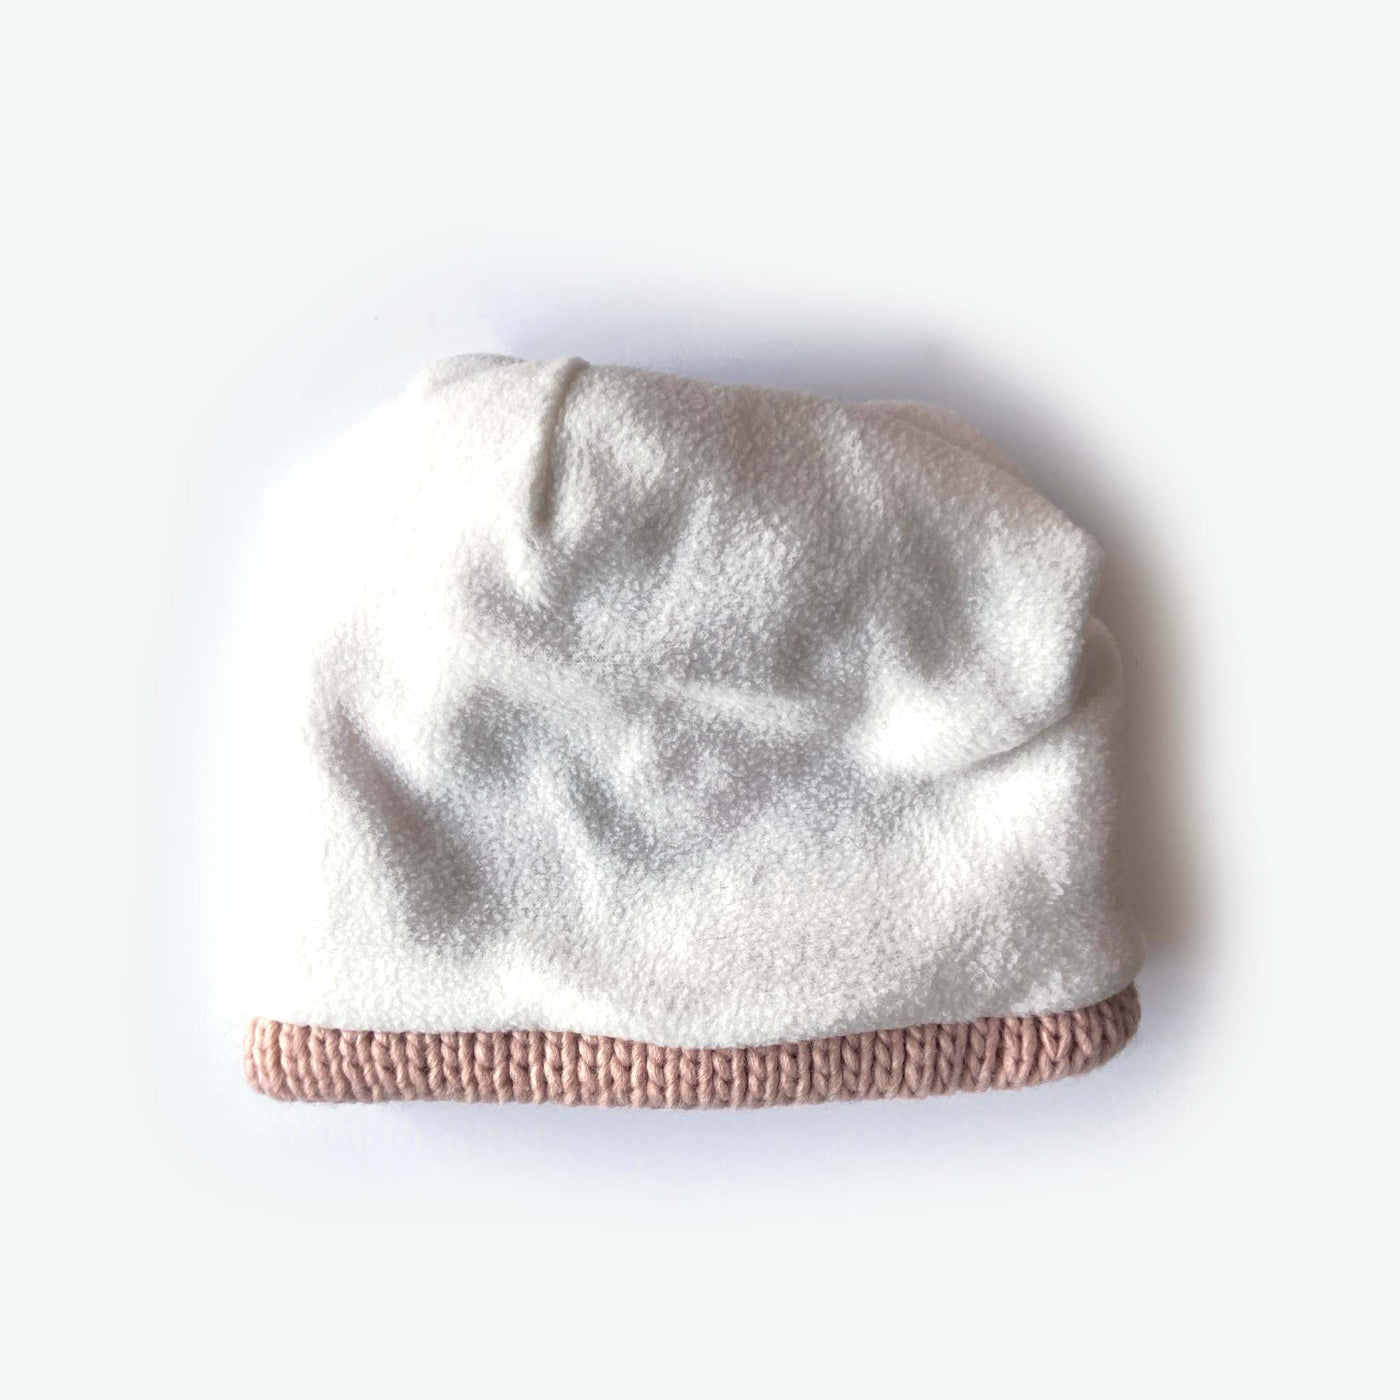 Harriet Embroidered Hearts Kids Beanie - Peach (Age 3-6) - The Pretty Hat